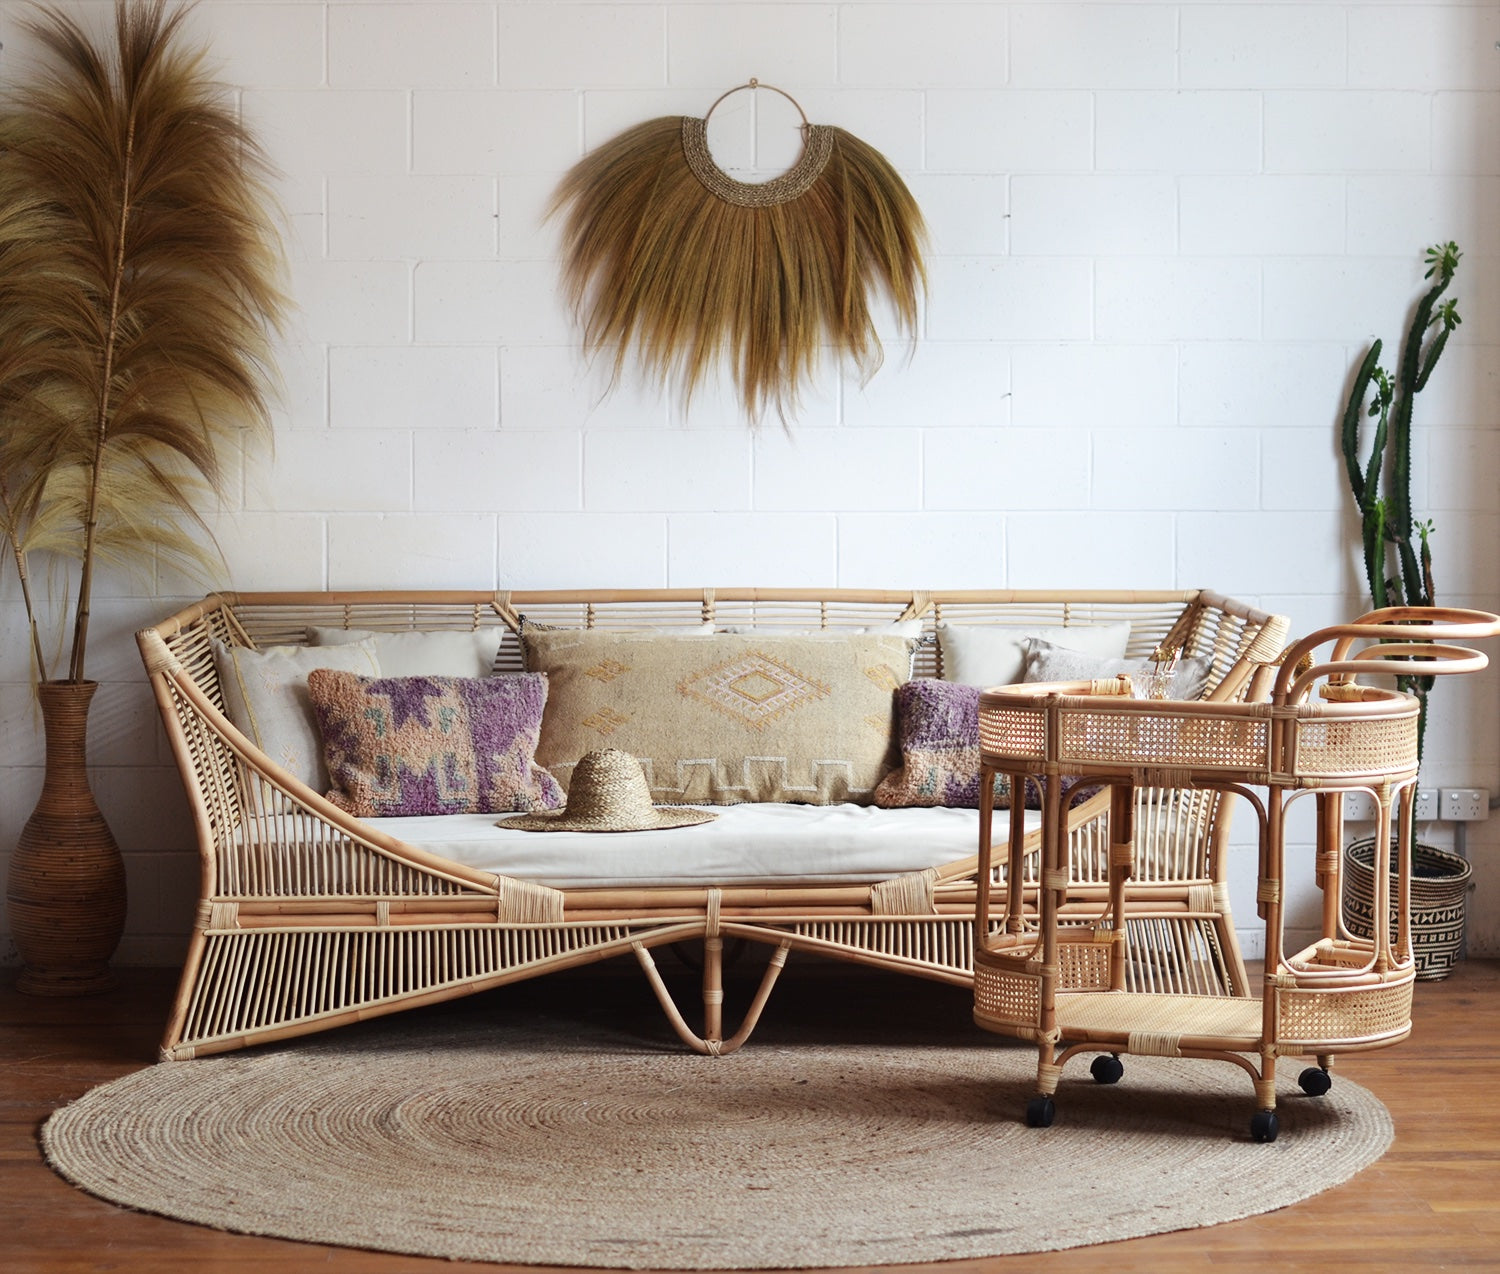 PREORDER - Brunswick Natural Rattan Daybed